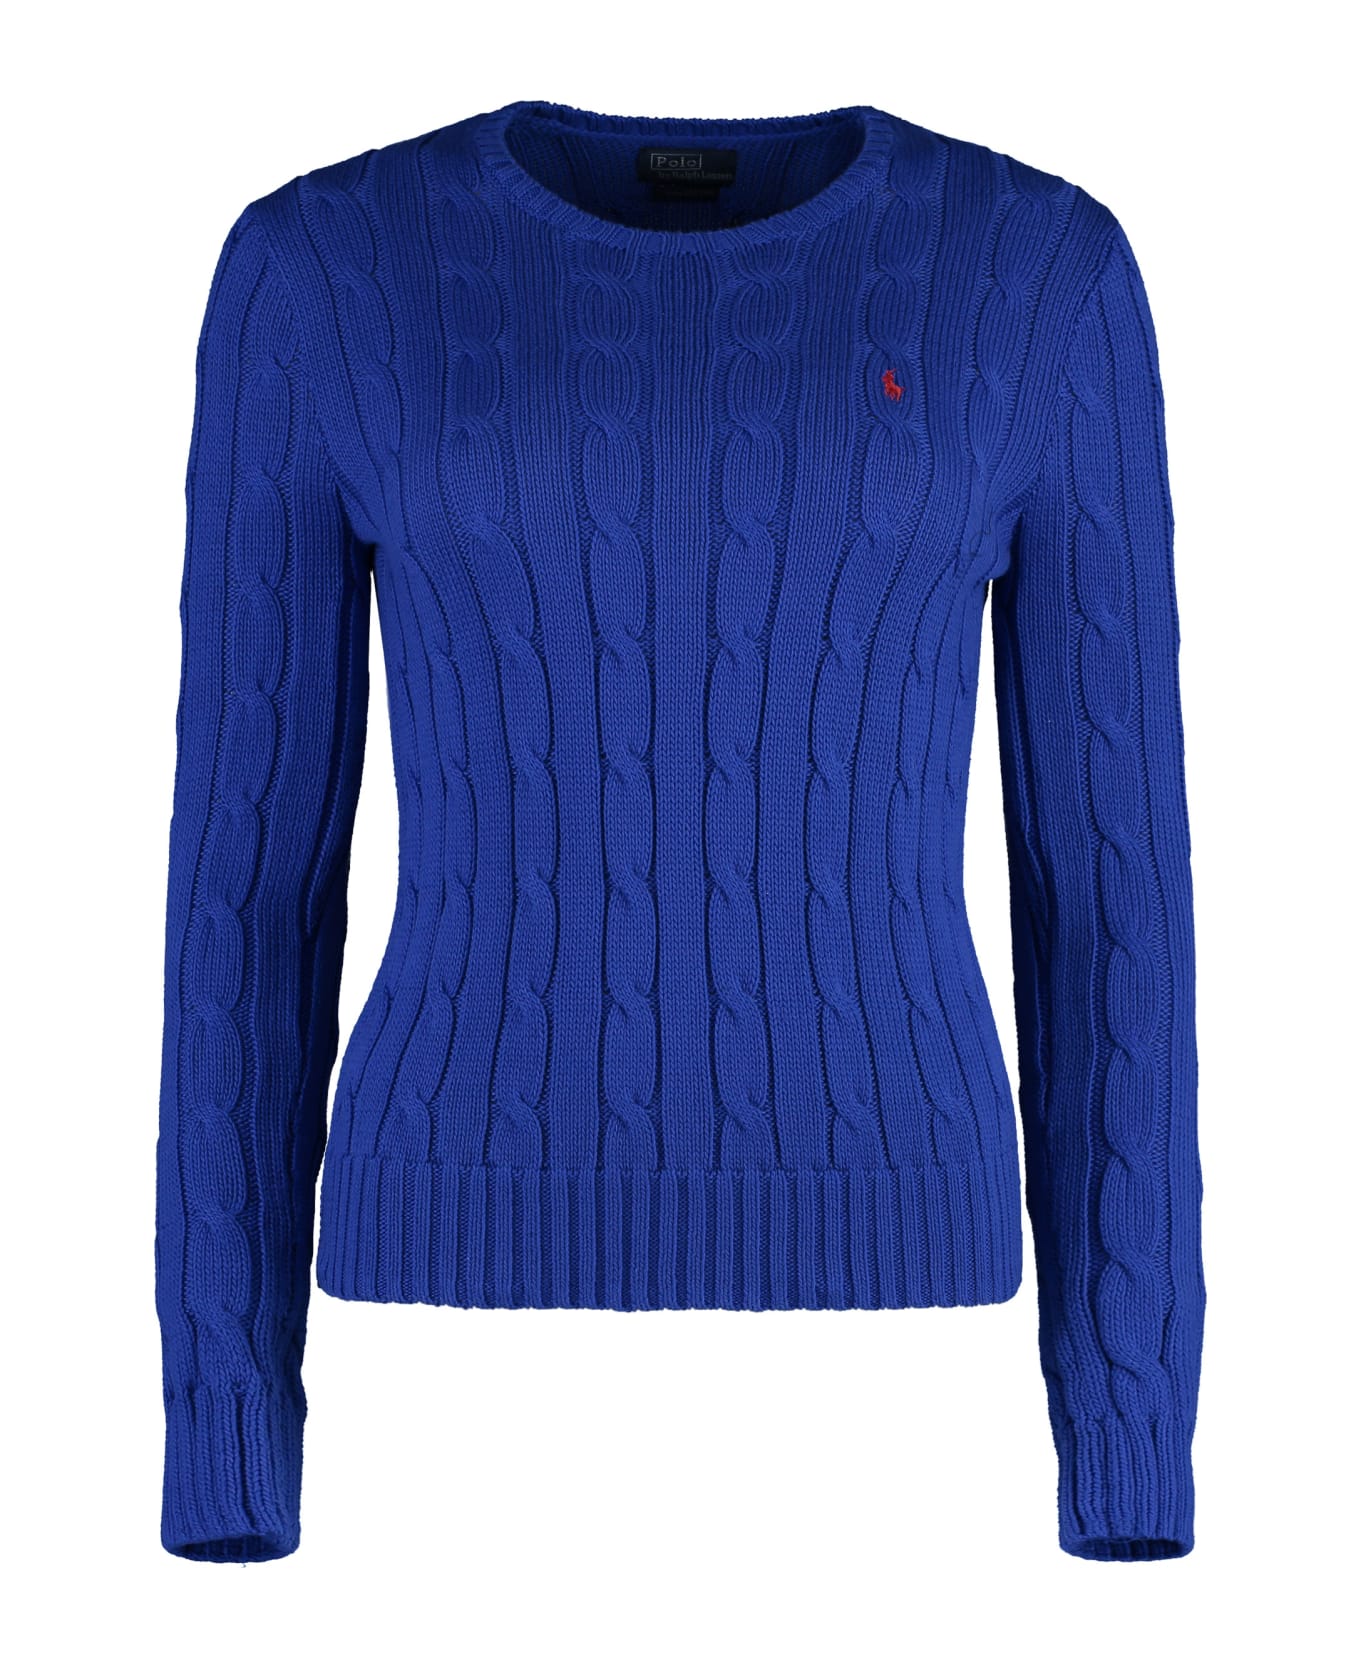 Polo Ralph Lauren Cable Knit Sweater - Blue フリース